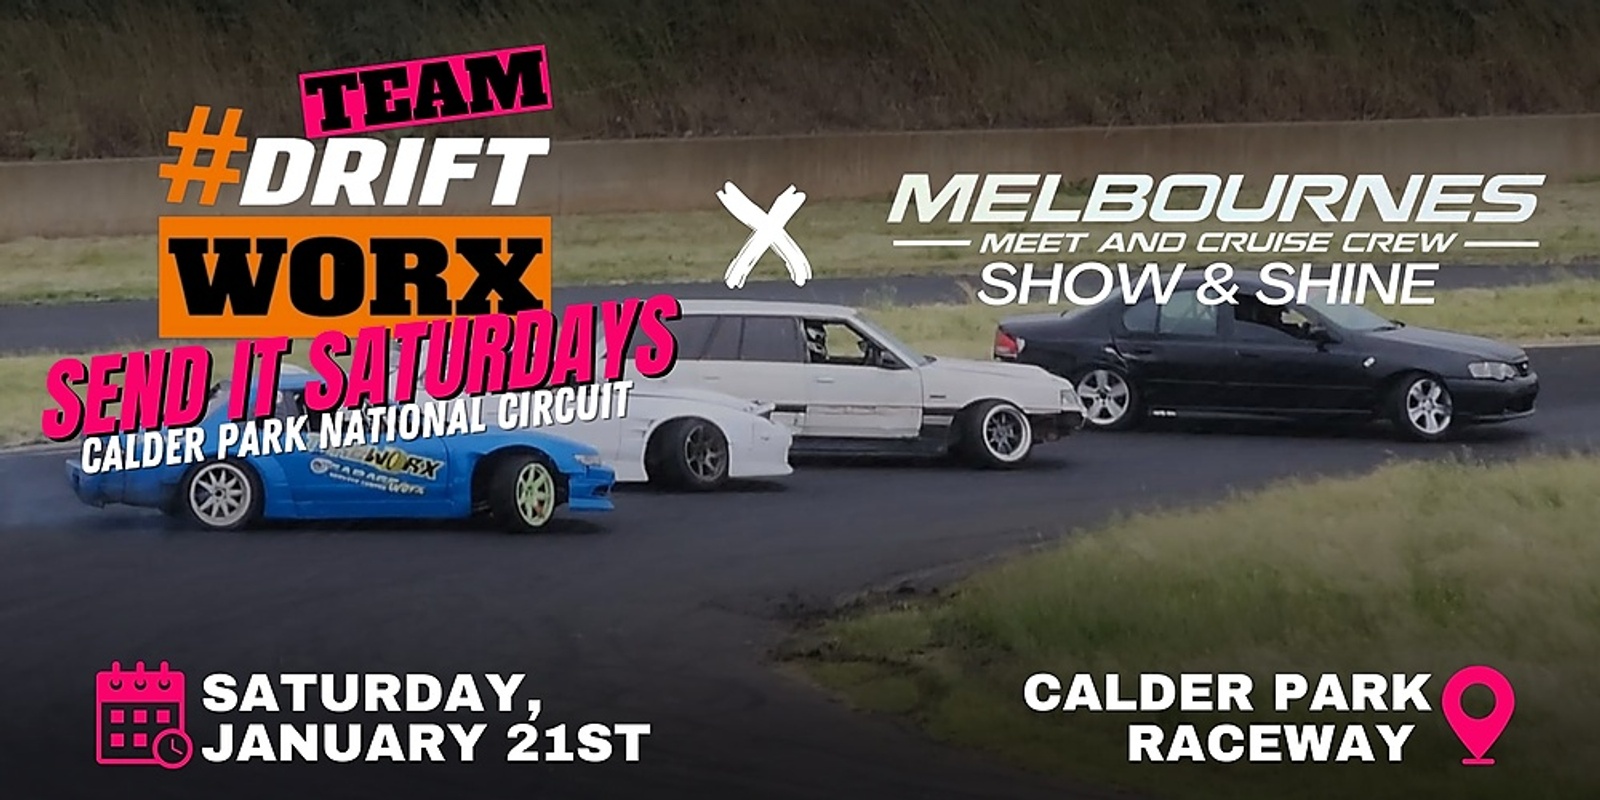 Banner image for DRIFTWORX 'SEND IT SATURDAYS' x MELBOURNE MEET & CRUISE CREW 'SHOW & SHINE', JANUARY 21ST, 2023